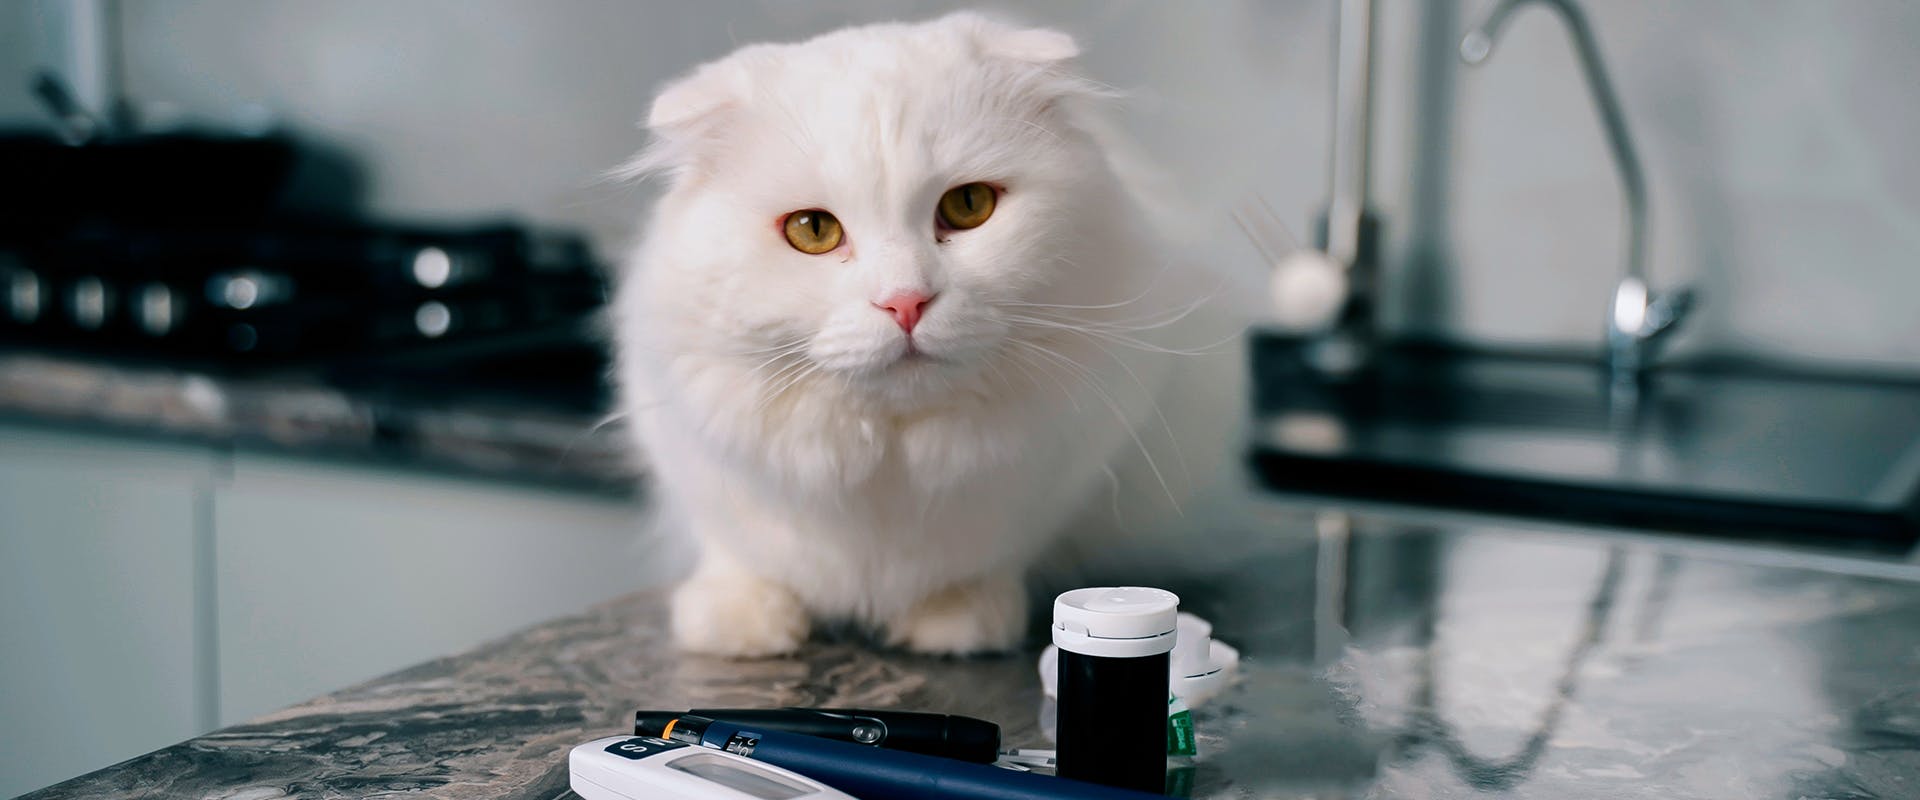 A cat perching on a kitchen worktop, a cat dna test laid out in front of it